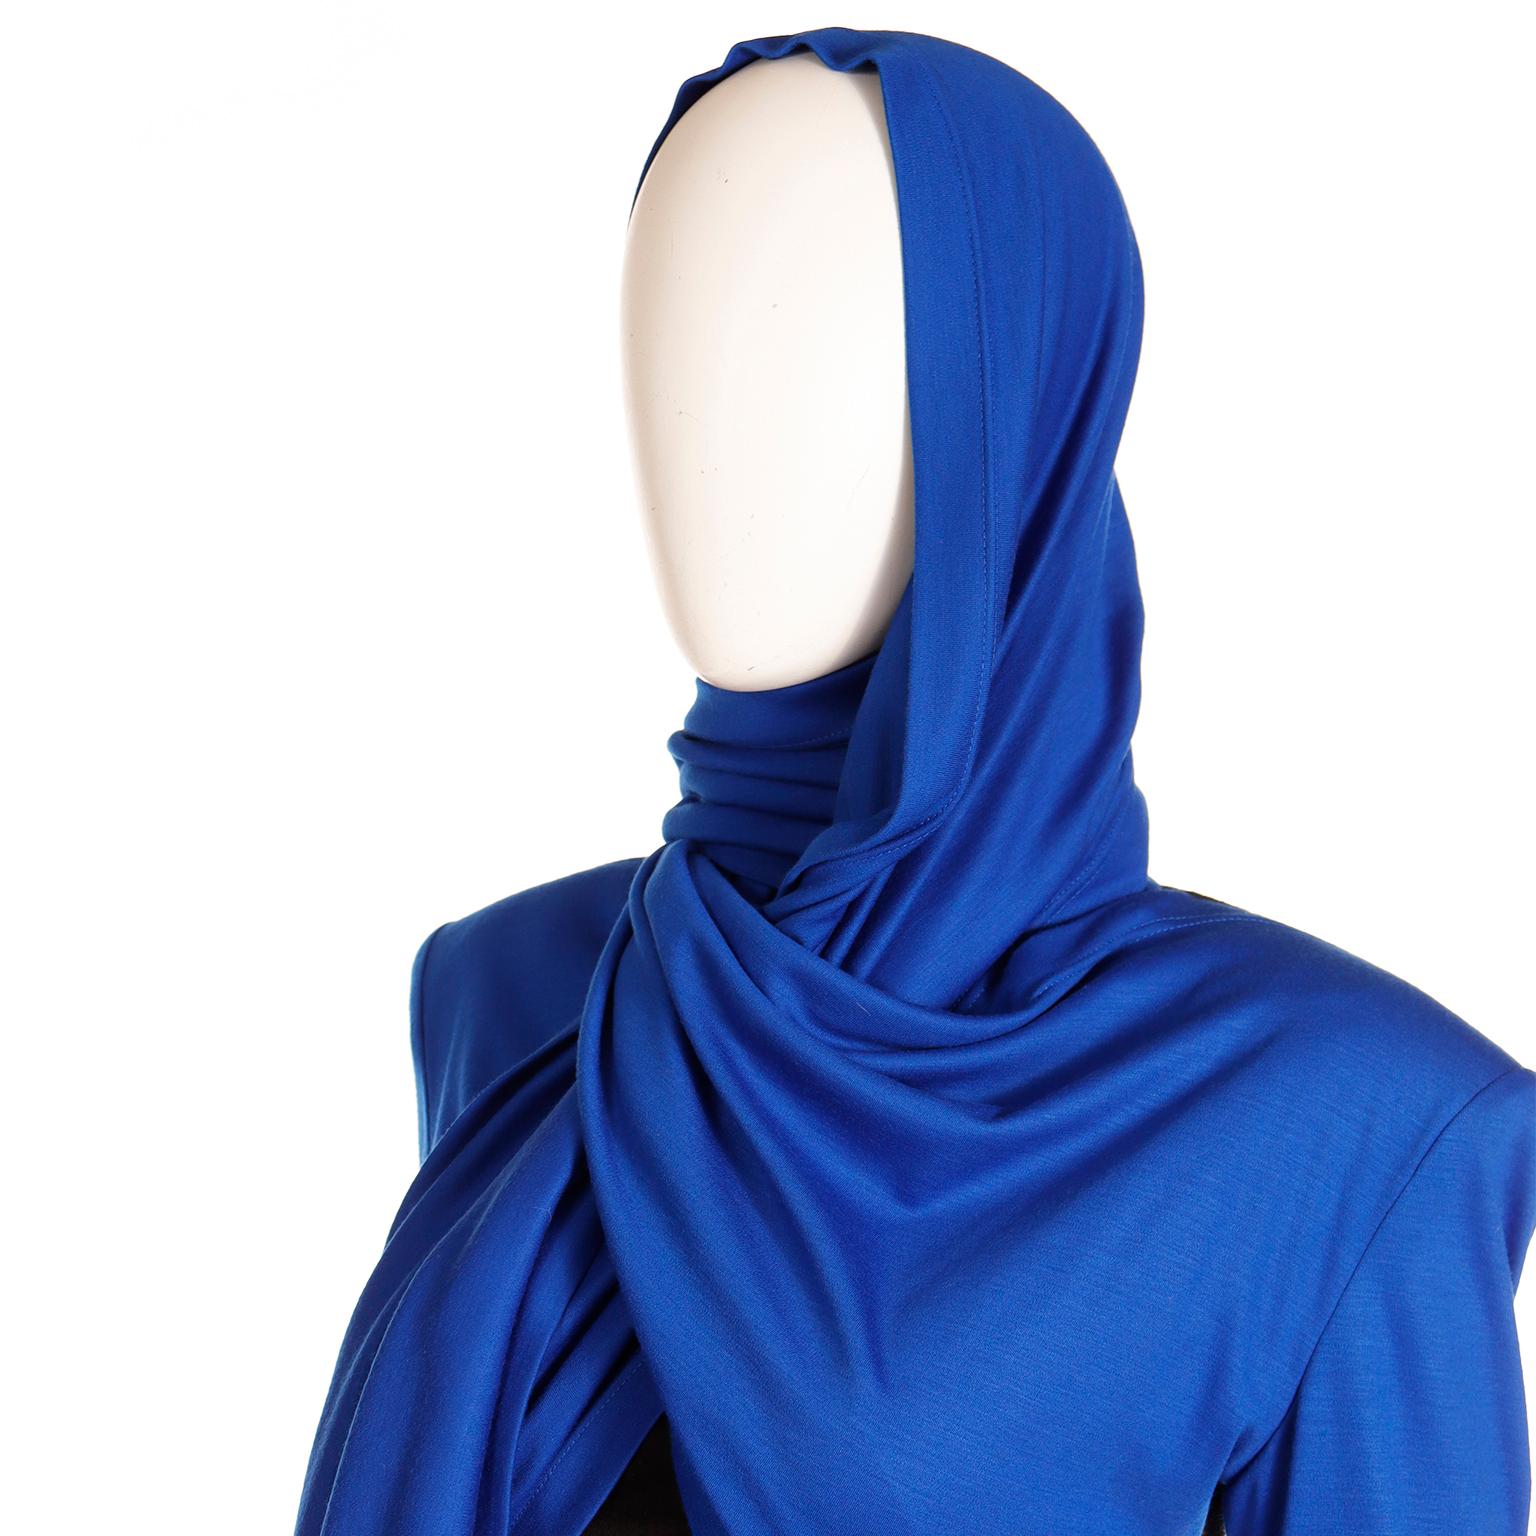 FW 1989 Patrick Kelly Runway Dress in Blue & Black Knit with Head Scarf  For Sale 10